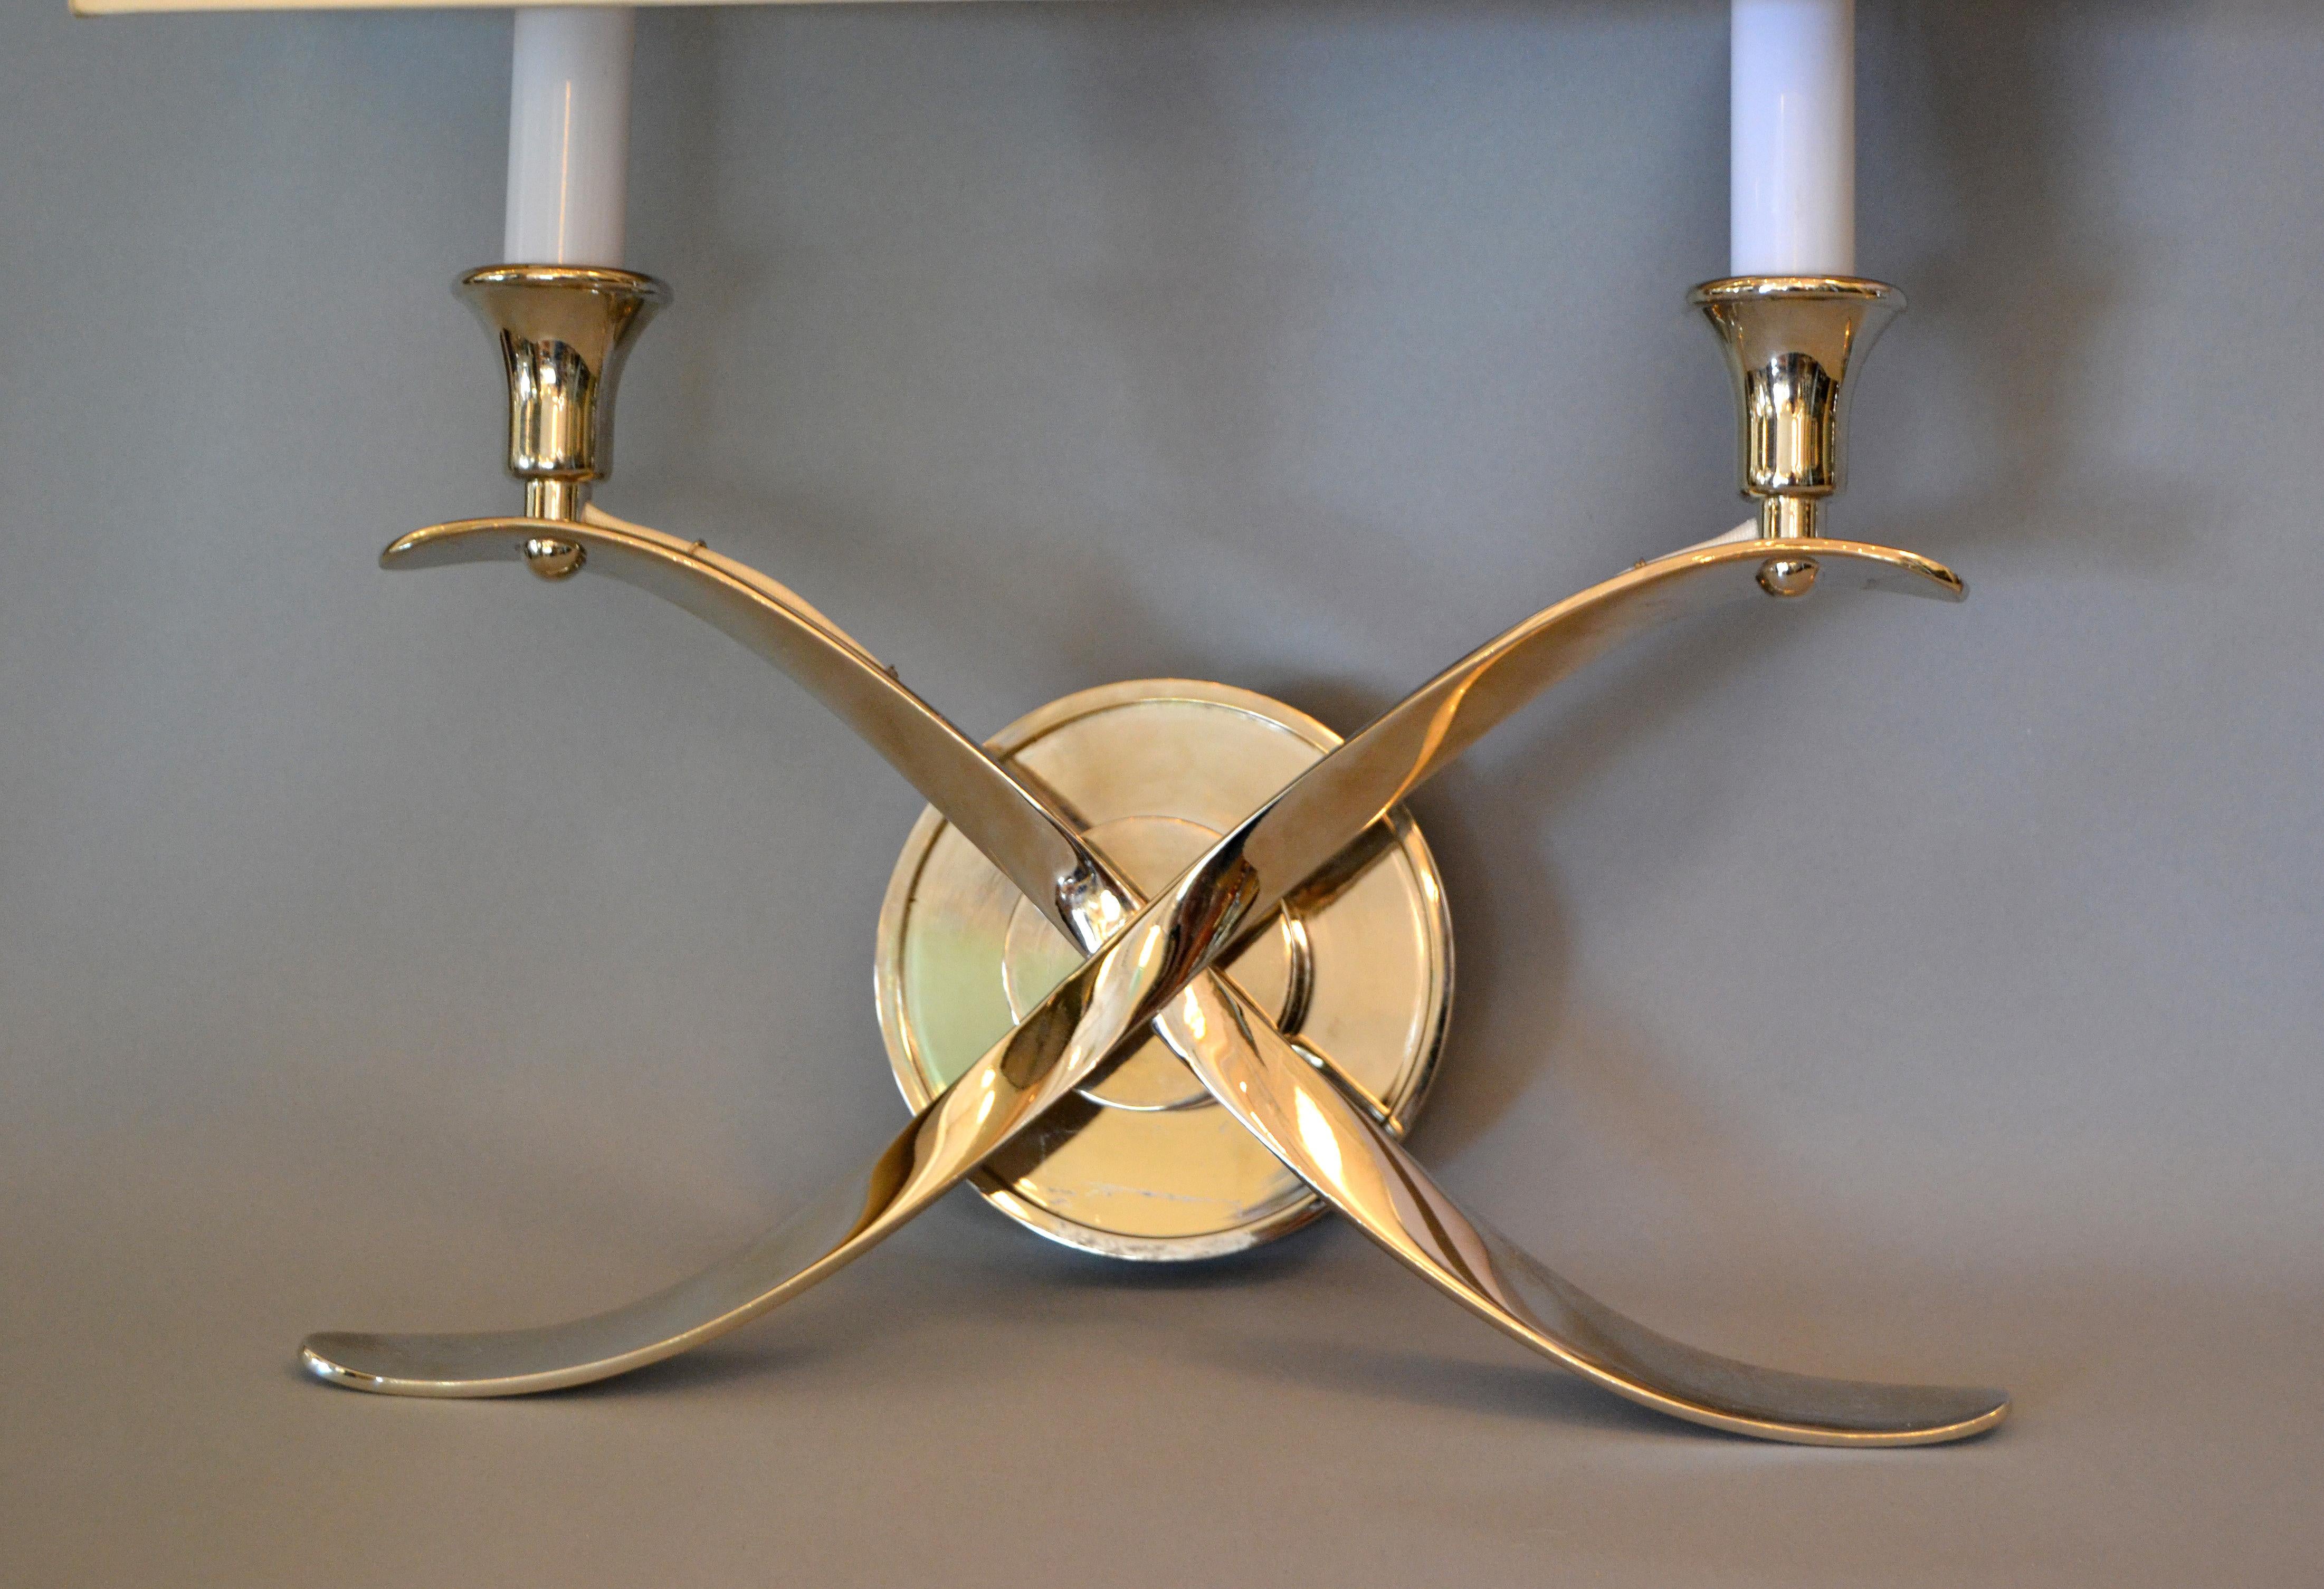 Elegant Crossed Scrollwork Stainless Steel Double Sconces and Paper Shades, Pair (20. Jahrhundert)